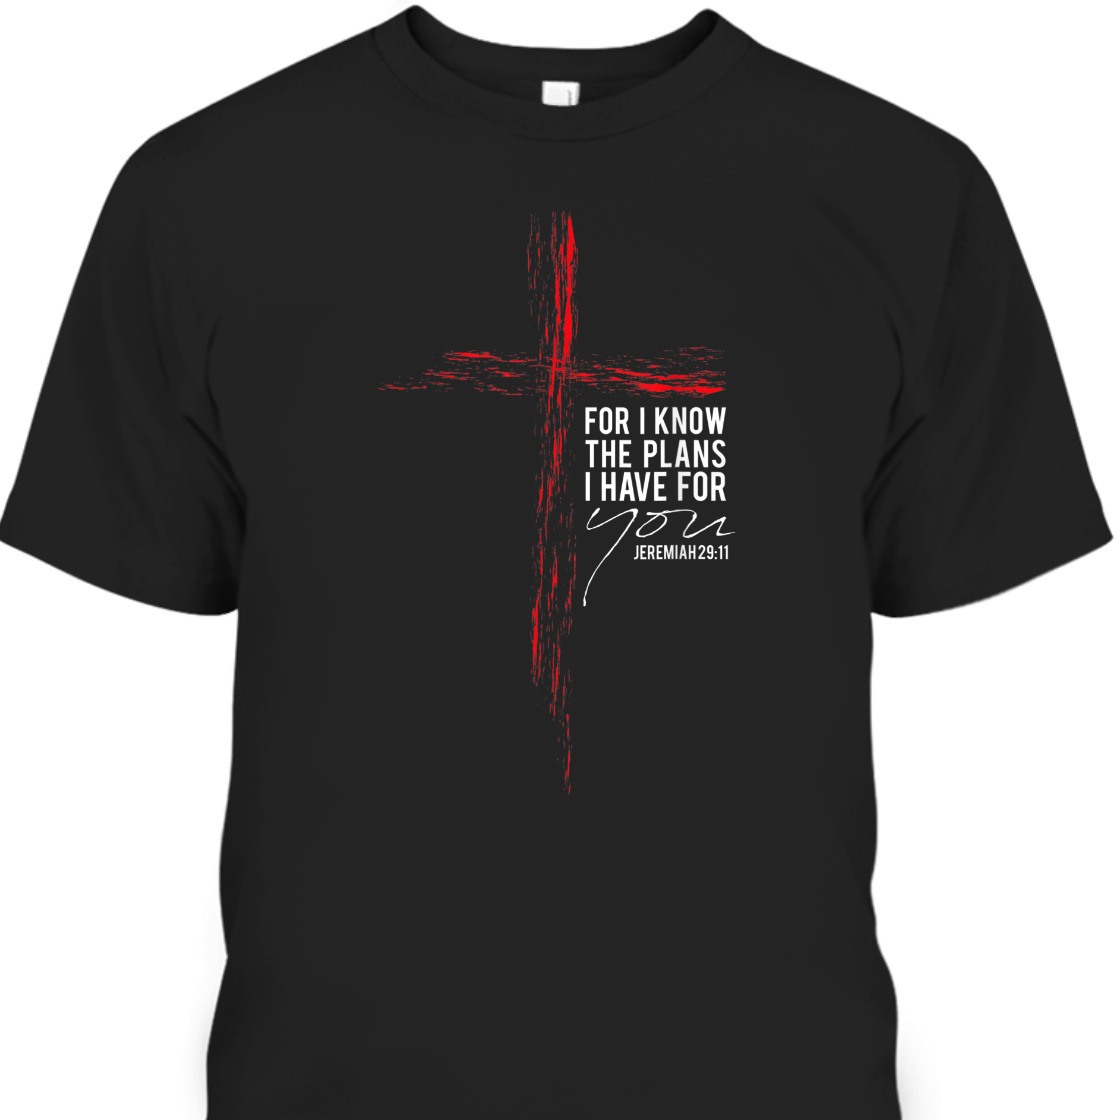 For I Know The Plans I Have For You Jeremiah 29:11 Bible Verse T-Shirt